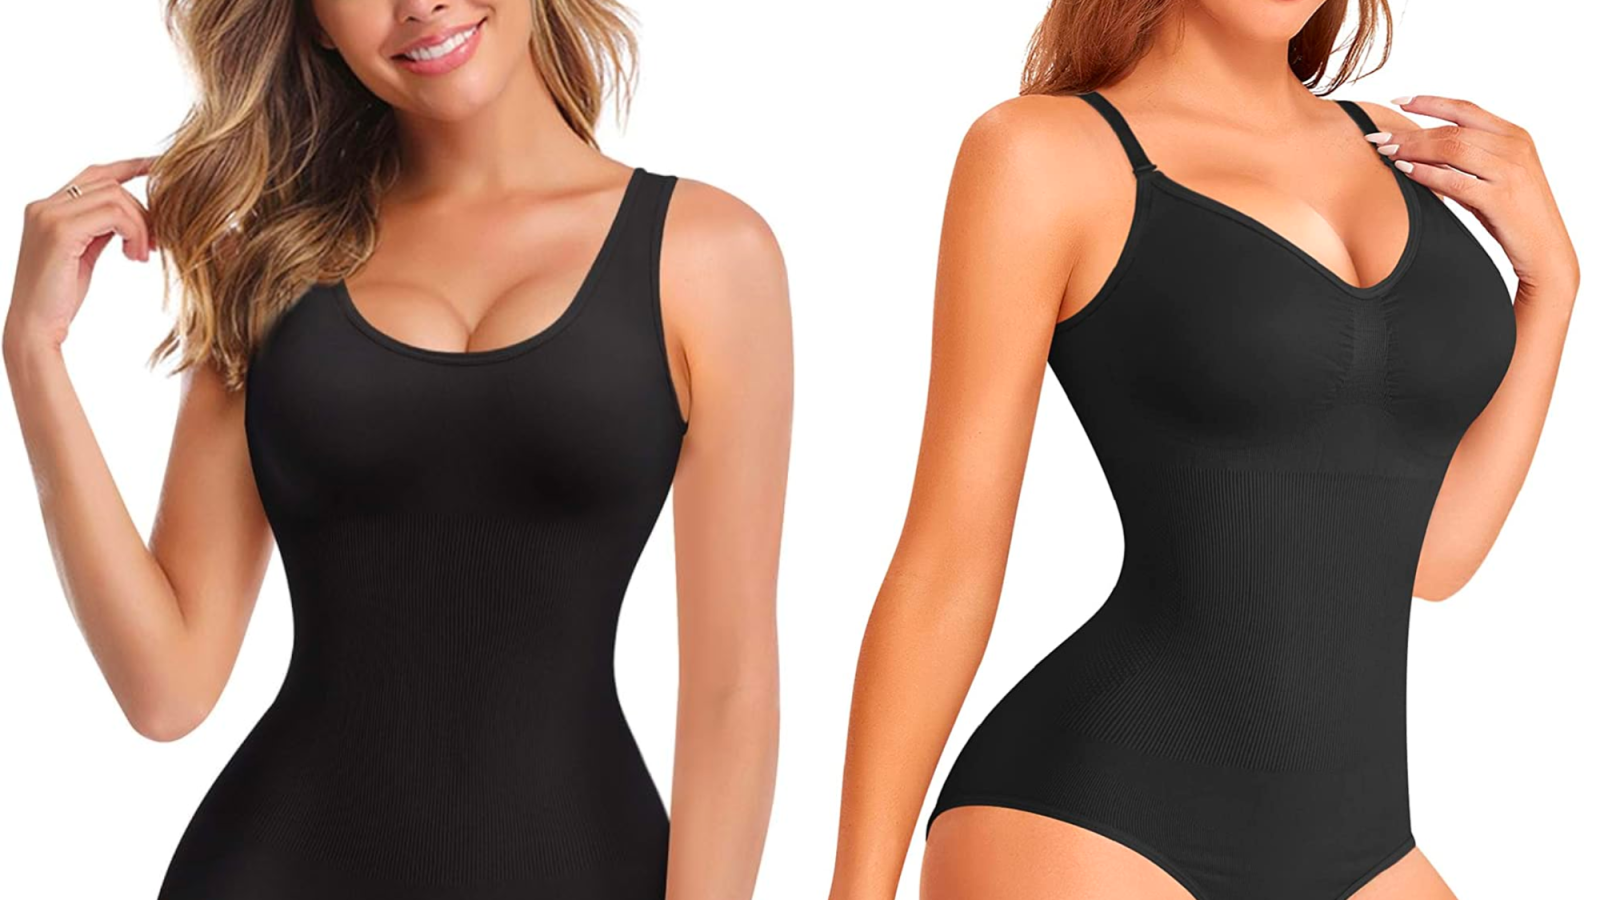 If you are looking for a shapewear body suit, look no further